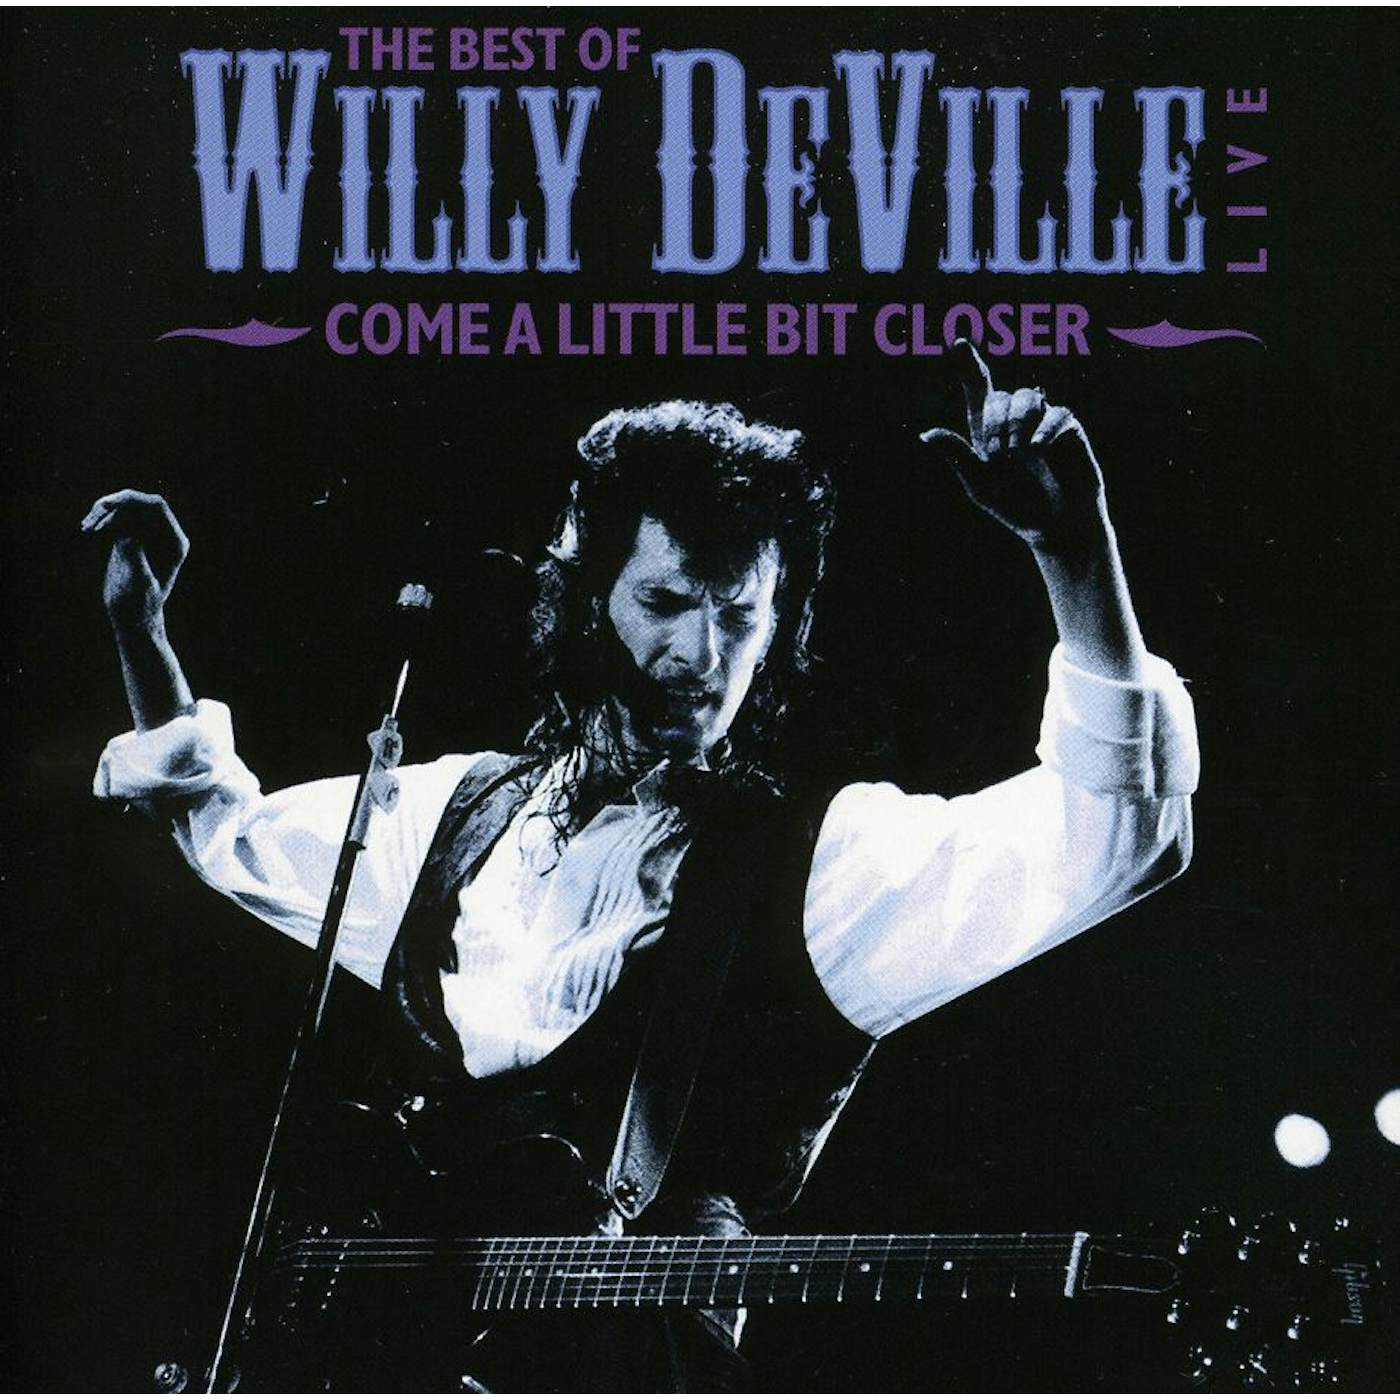 BEST OF WILLY DEVILLE CD